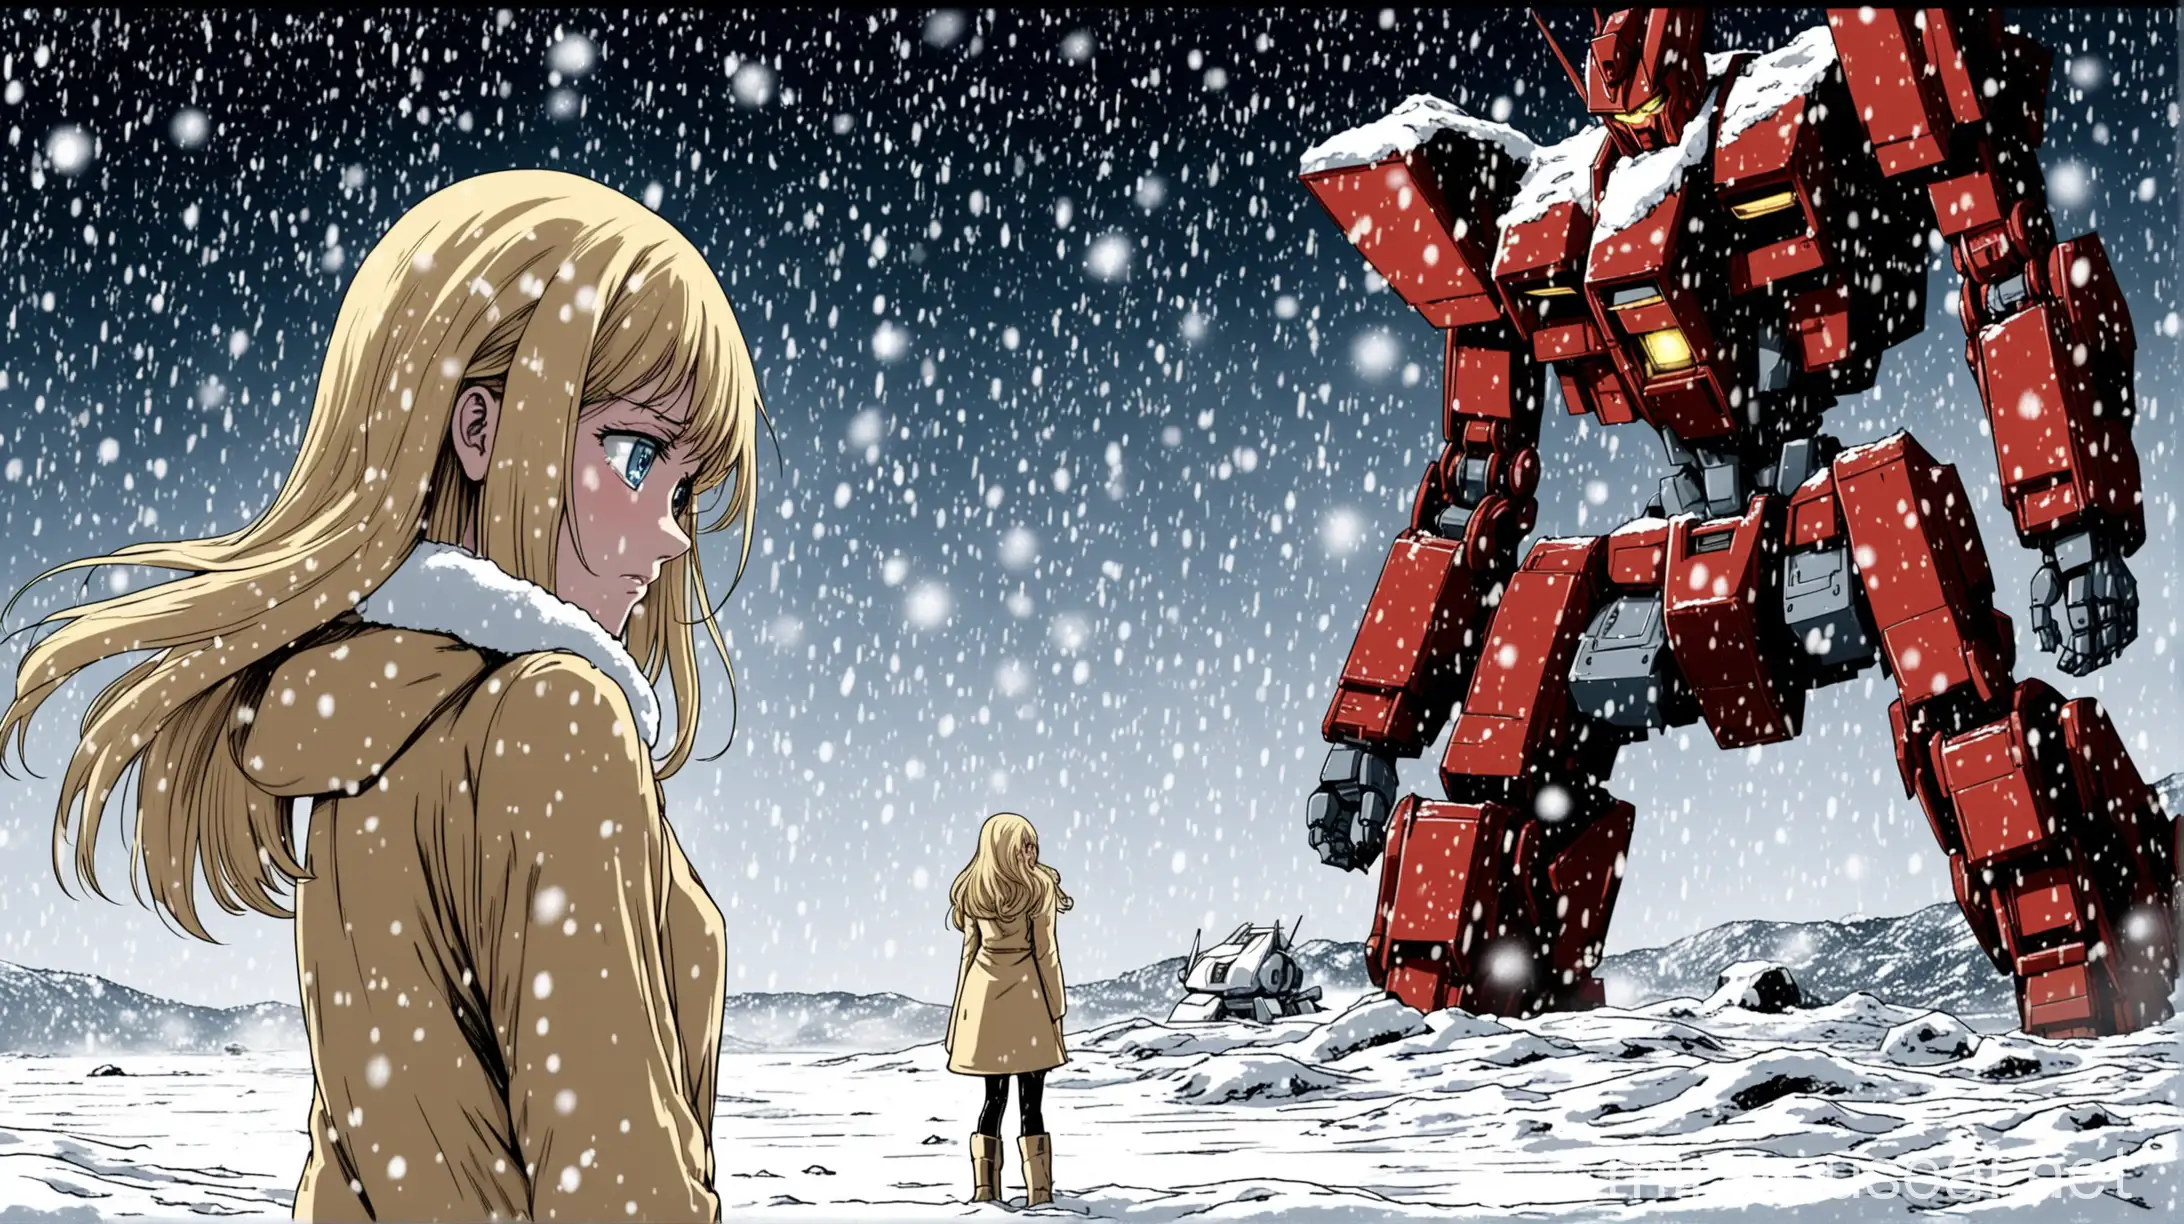 Gorgeous Blonde Woman in Snowfall with Glowing Red Eyes and Giant Robot